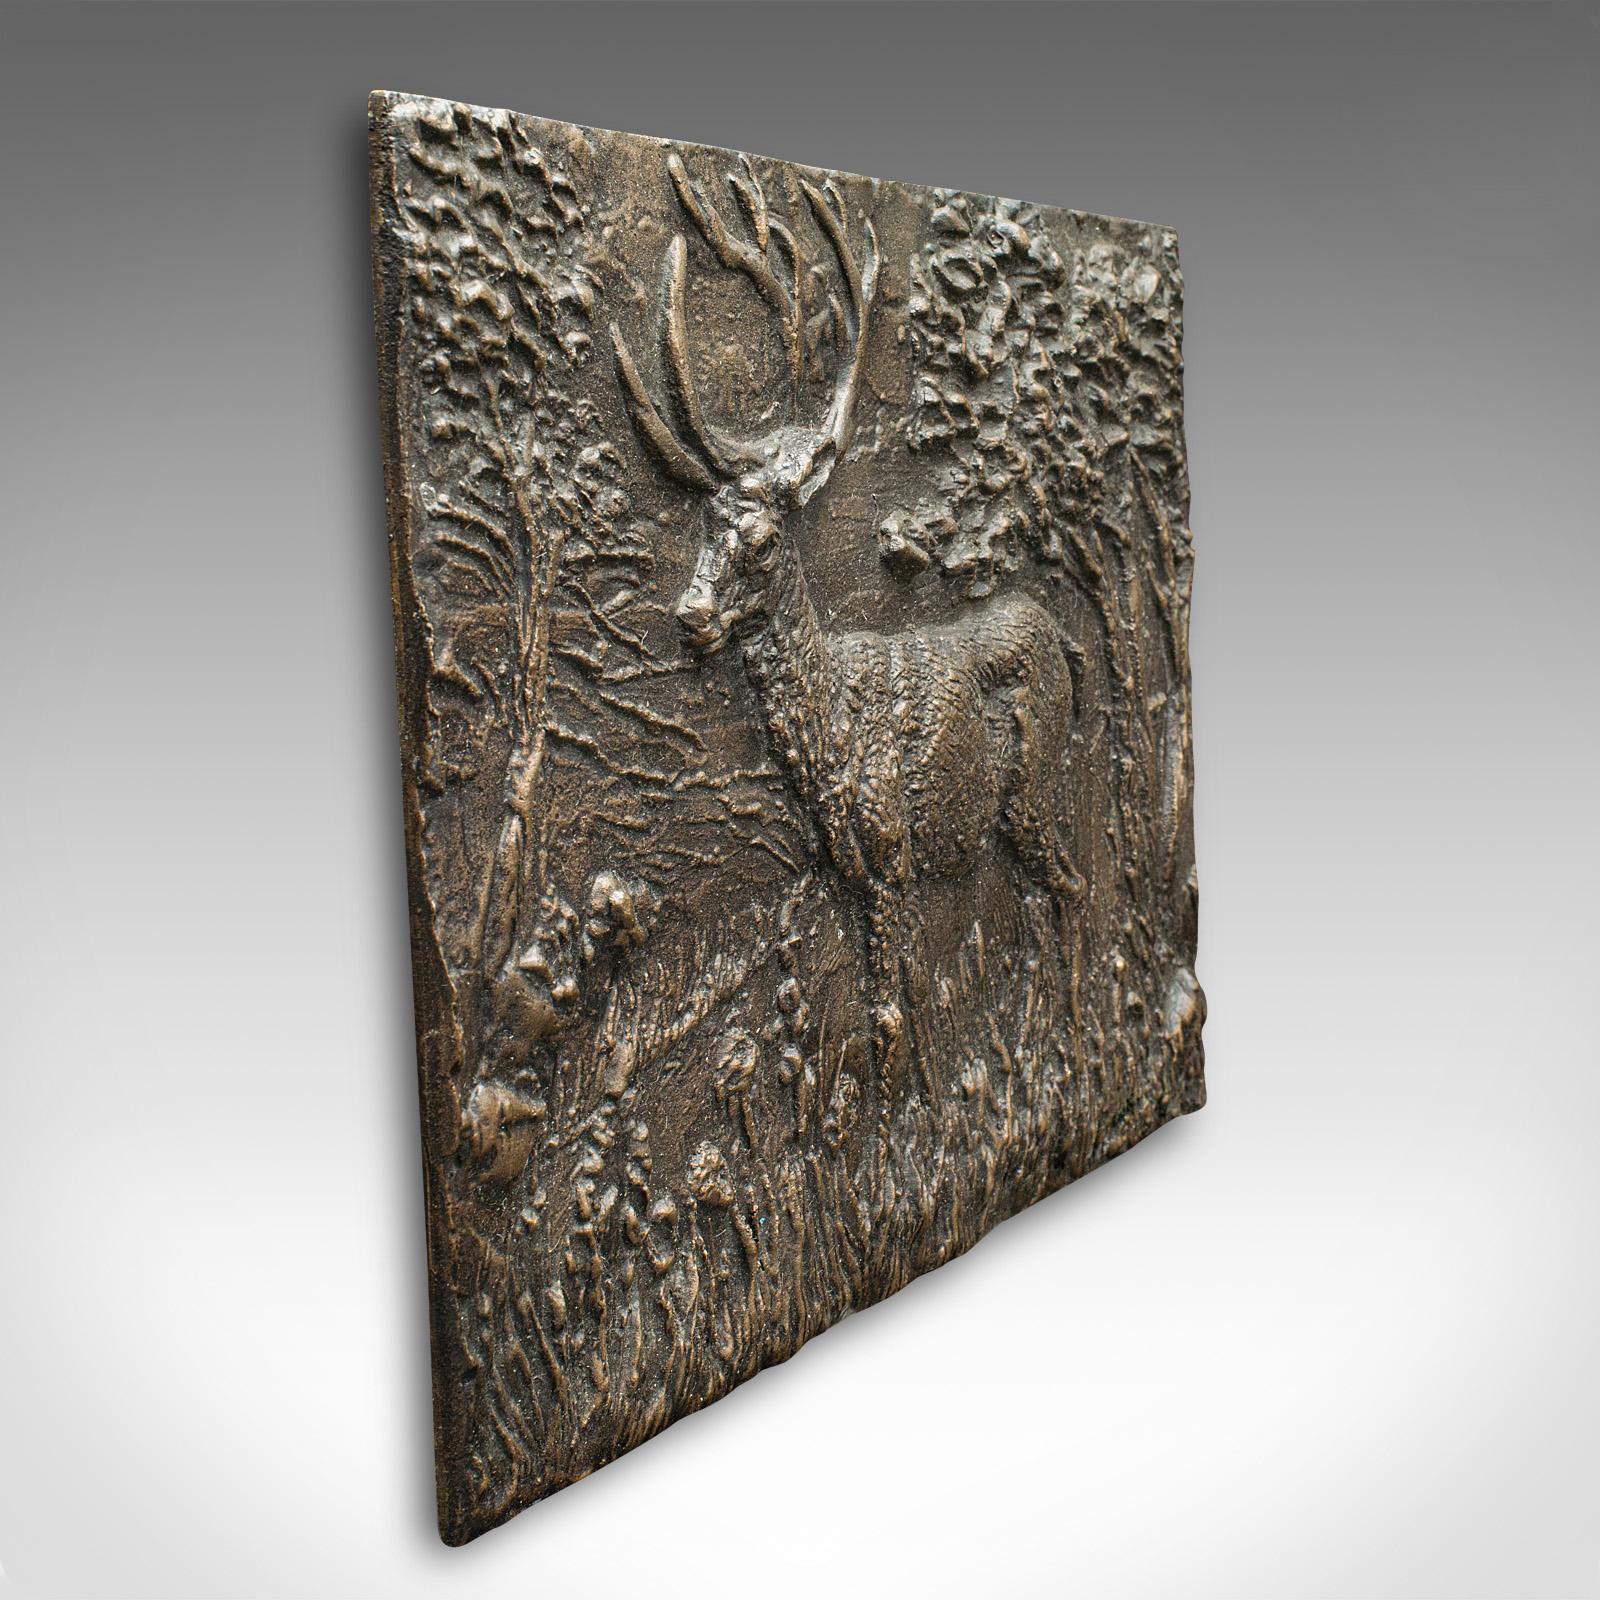 British Vintage Stag Relief Plaque, English, Bronze, Decorative Plate, Country House For Sale